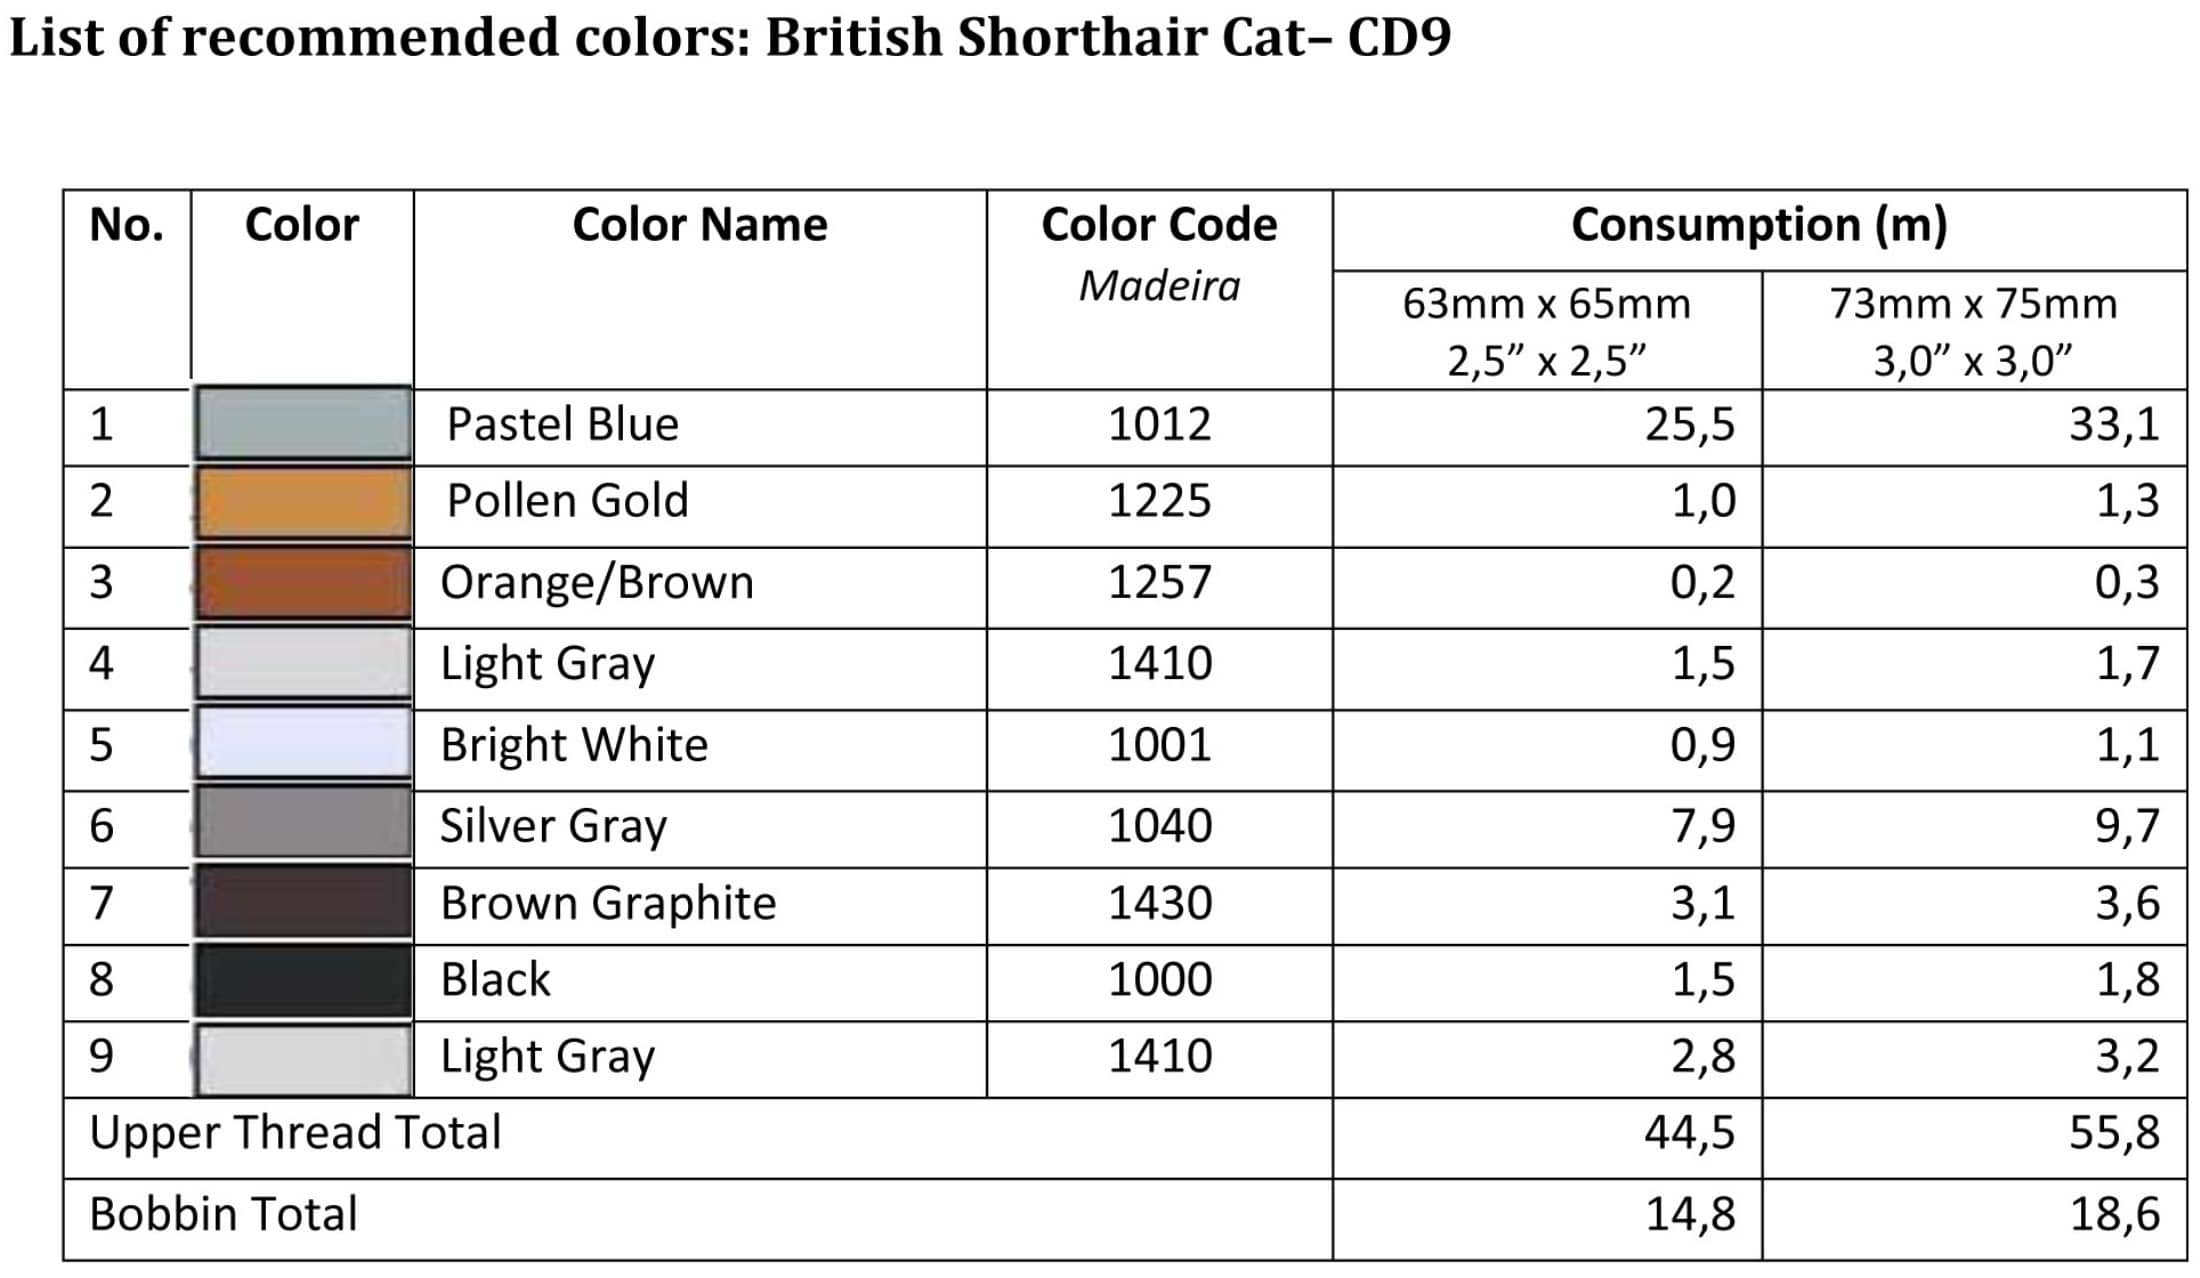 List of recommended colors - British Shorthair Cat - CD9